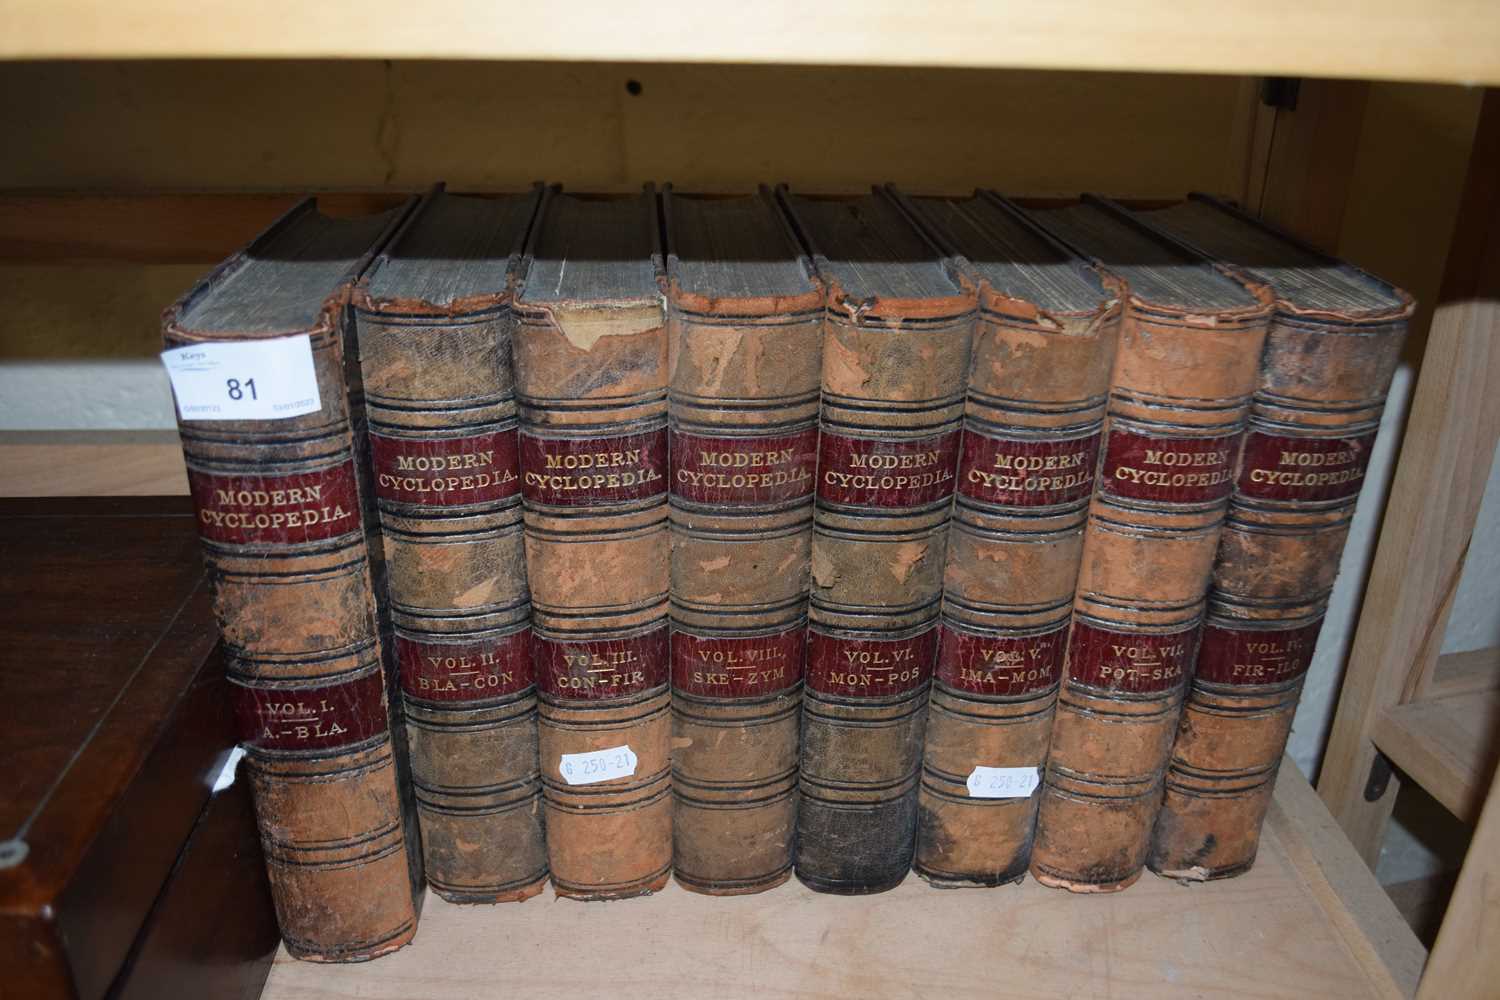 Quantity of The Modern Encyclopaedia, published by Gresham 1901, vols 1 to 9